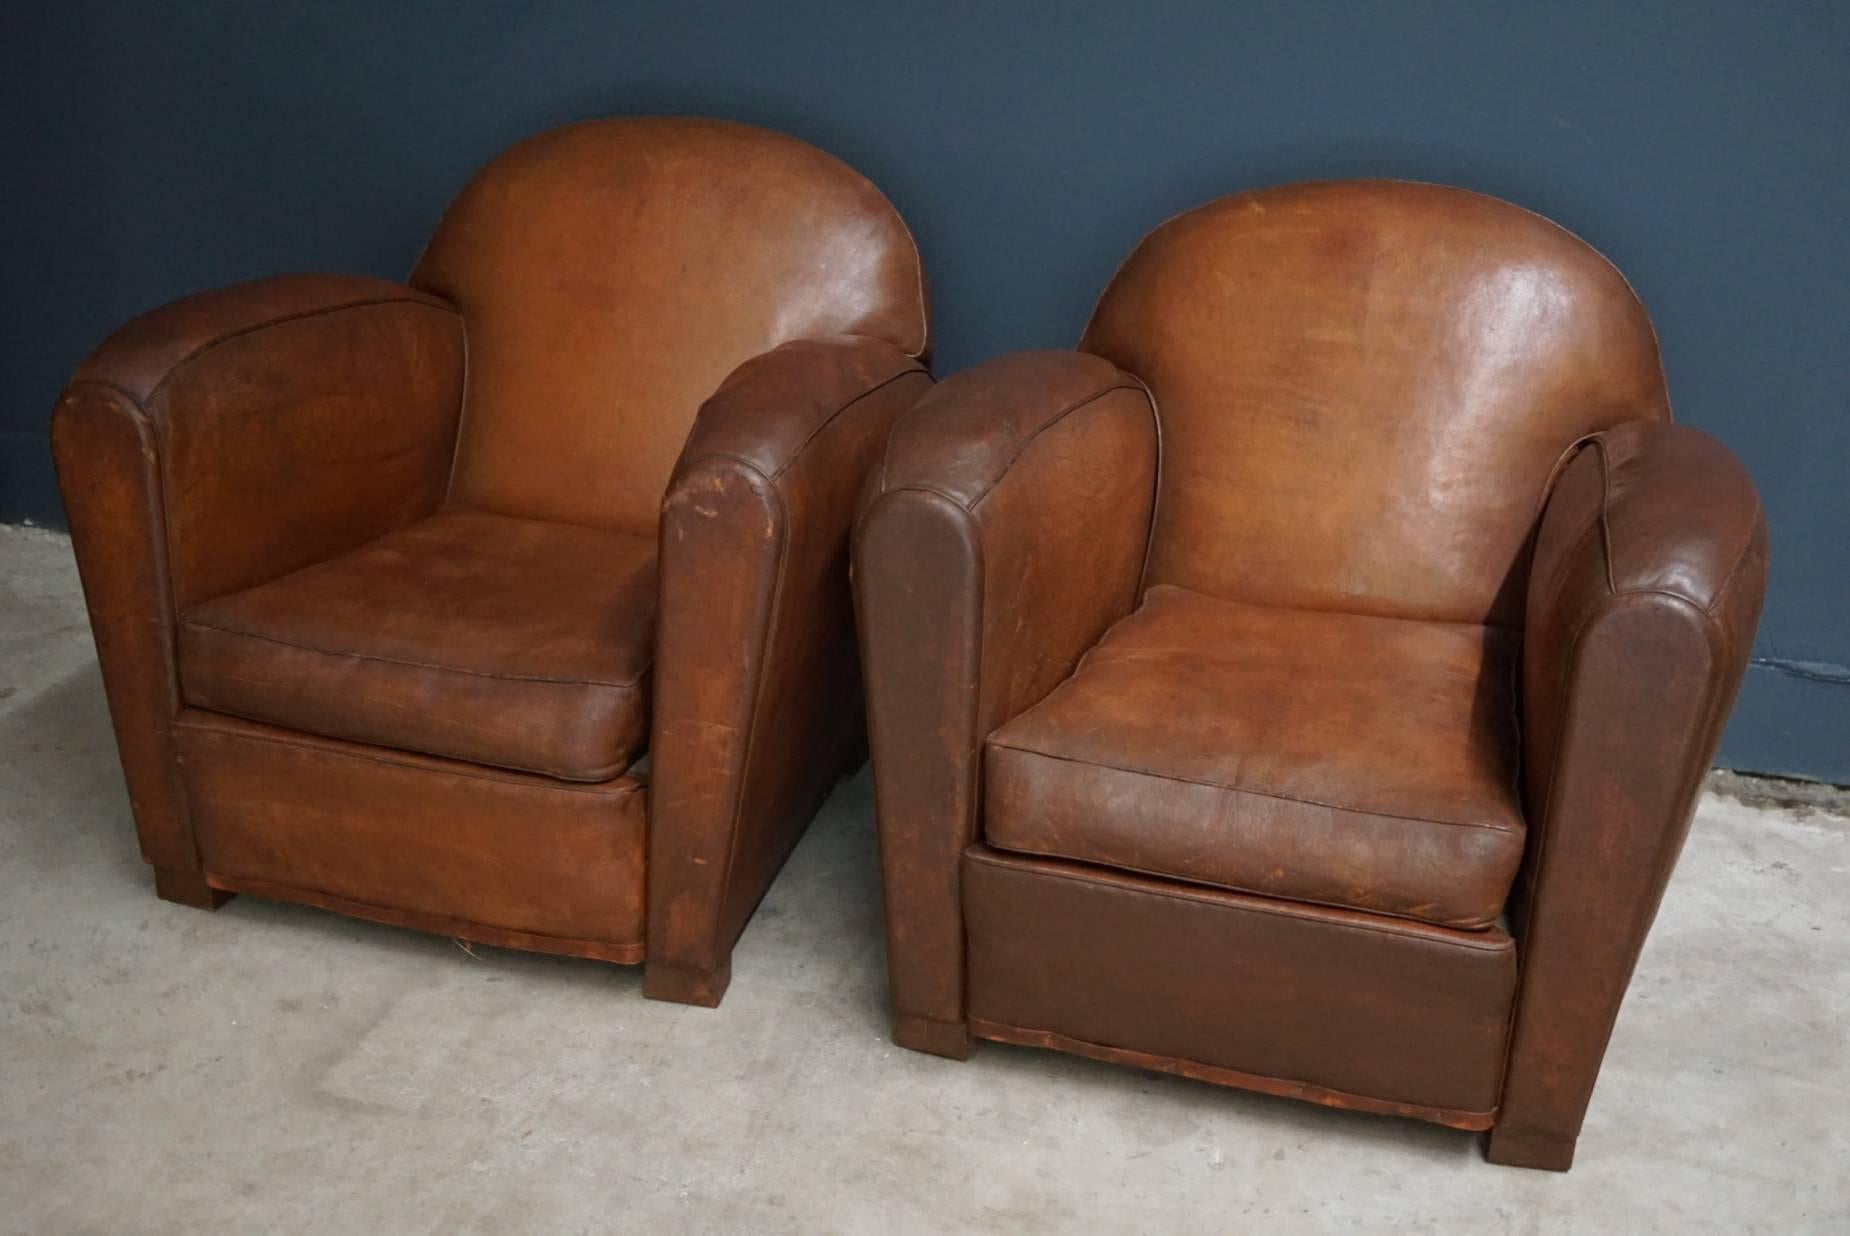 This pair of cognac-colored leather club chairs comes from France. They feature rivets and wooden legs.